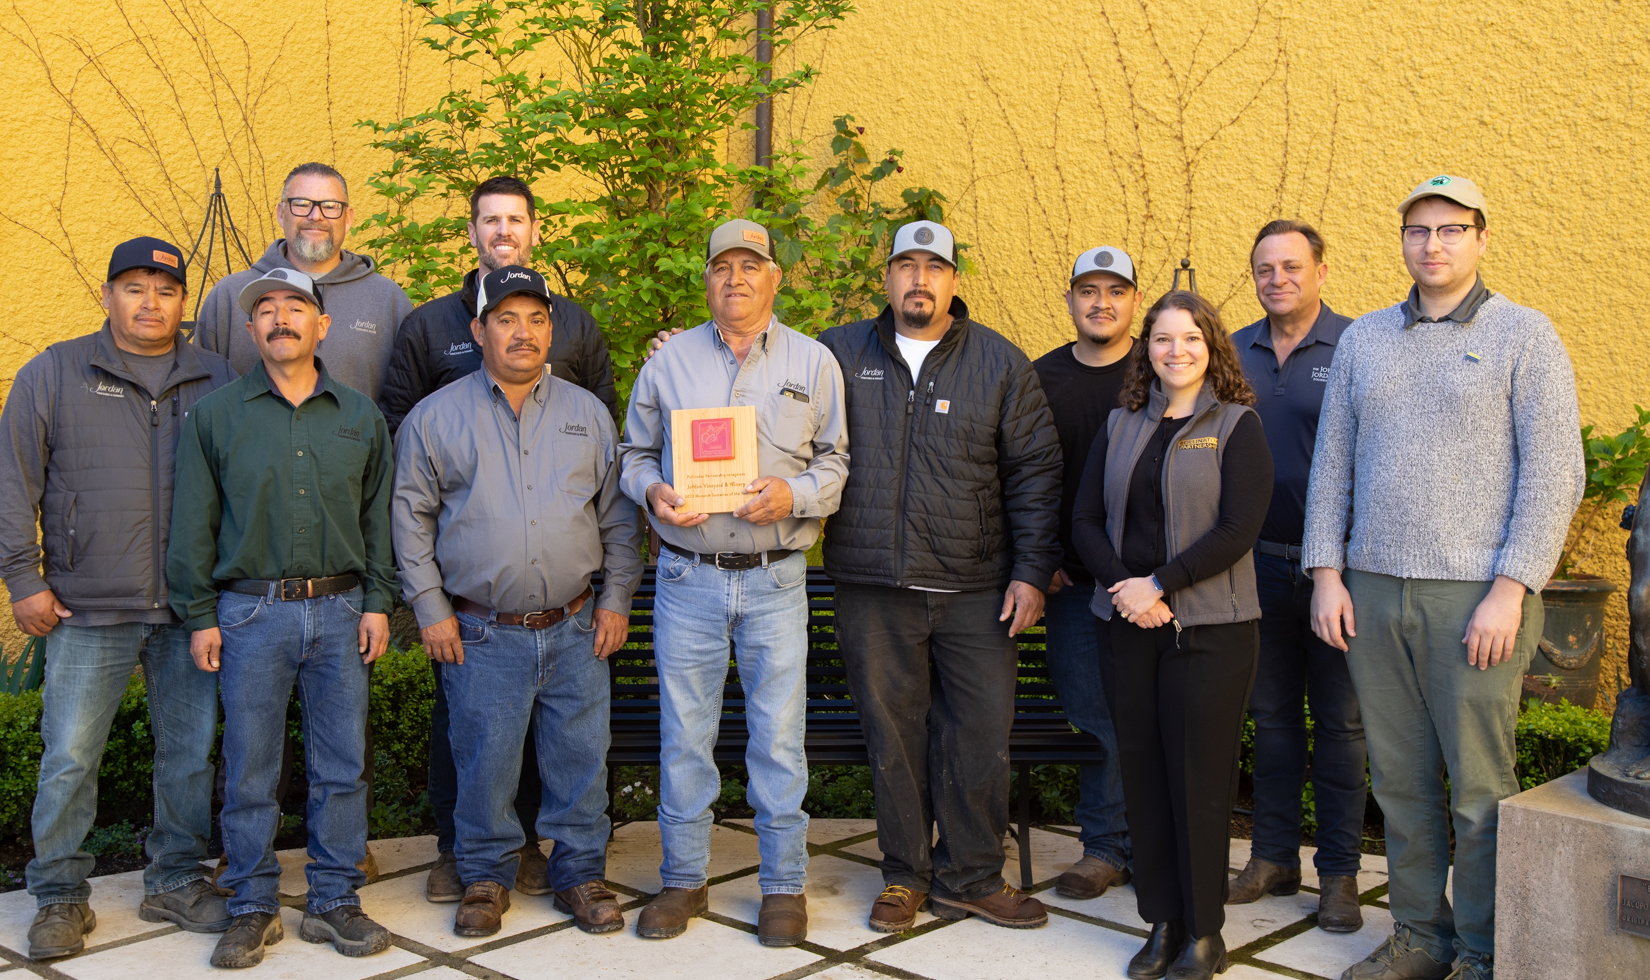 group of winery employees receiving sustainability award in courtyard